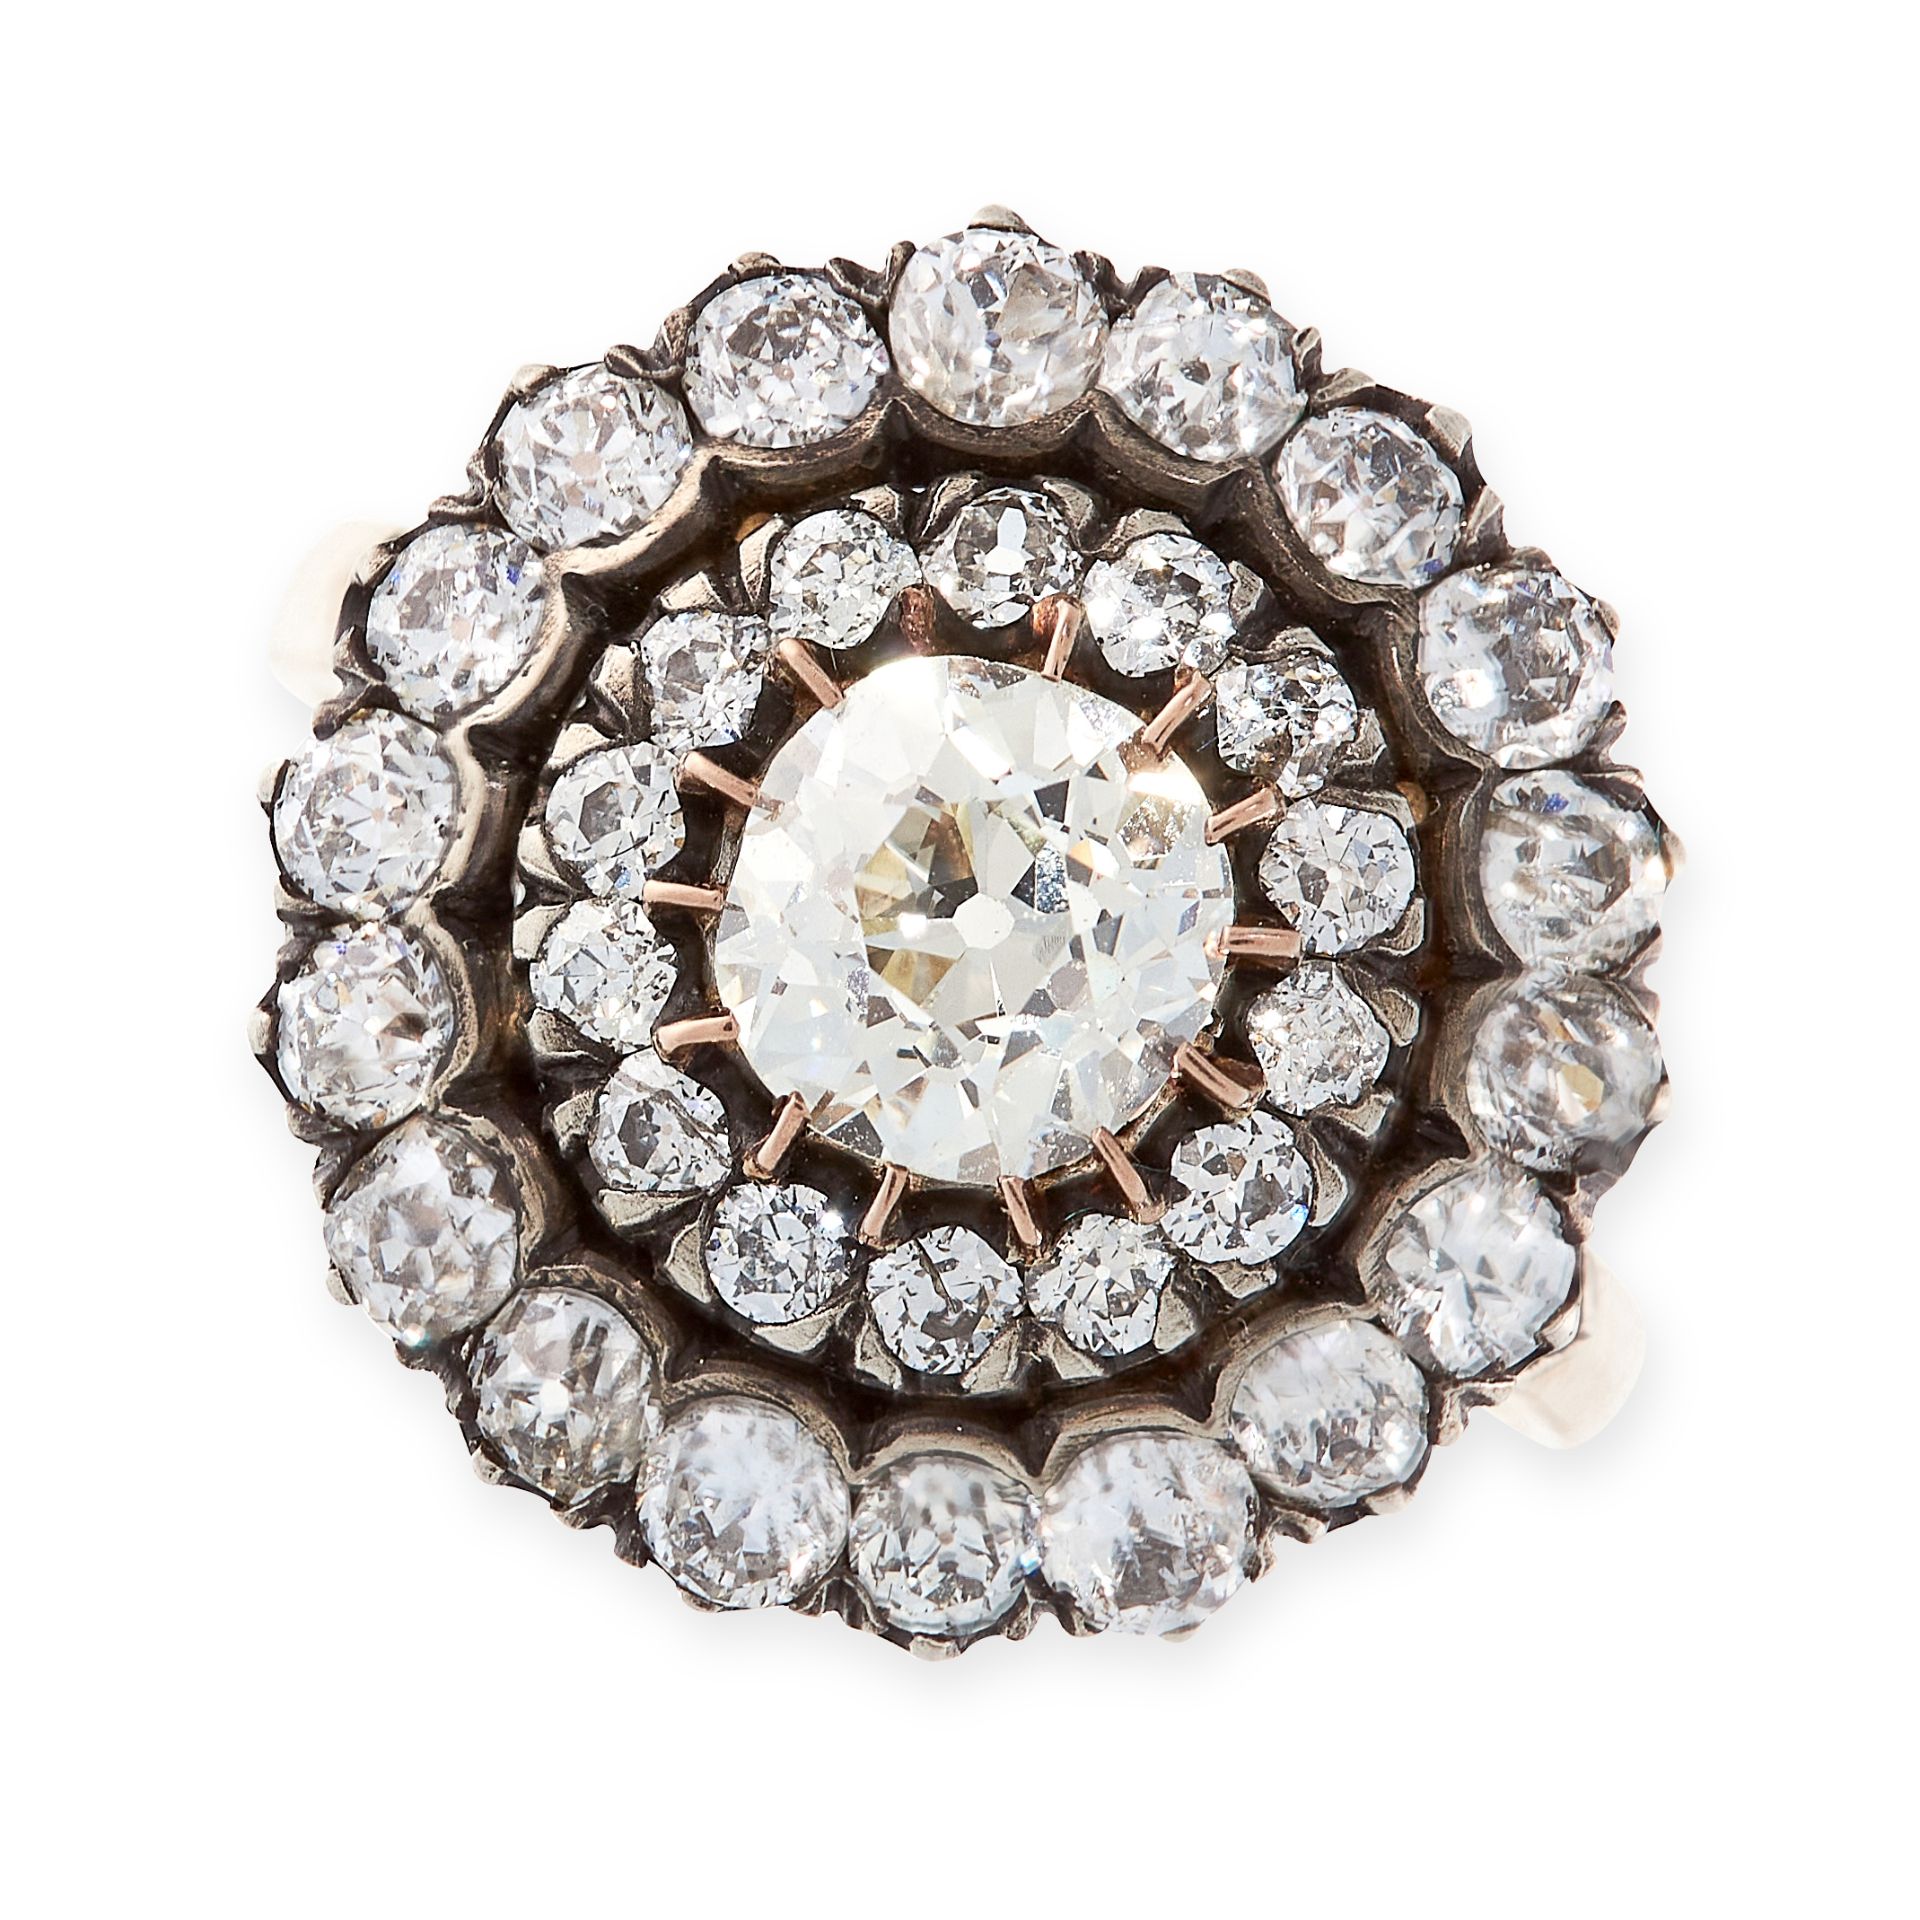 A DIAMOND CLUSTER RING in yellow gold and silver, set with a central old cut diamond of 1.27 carats,